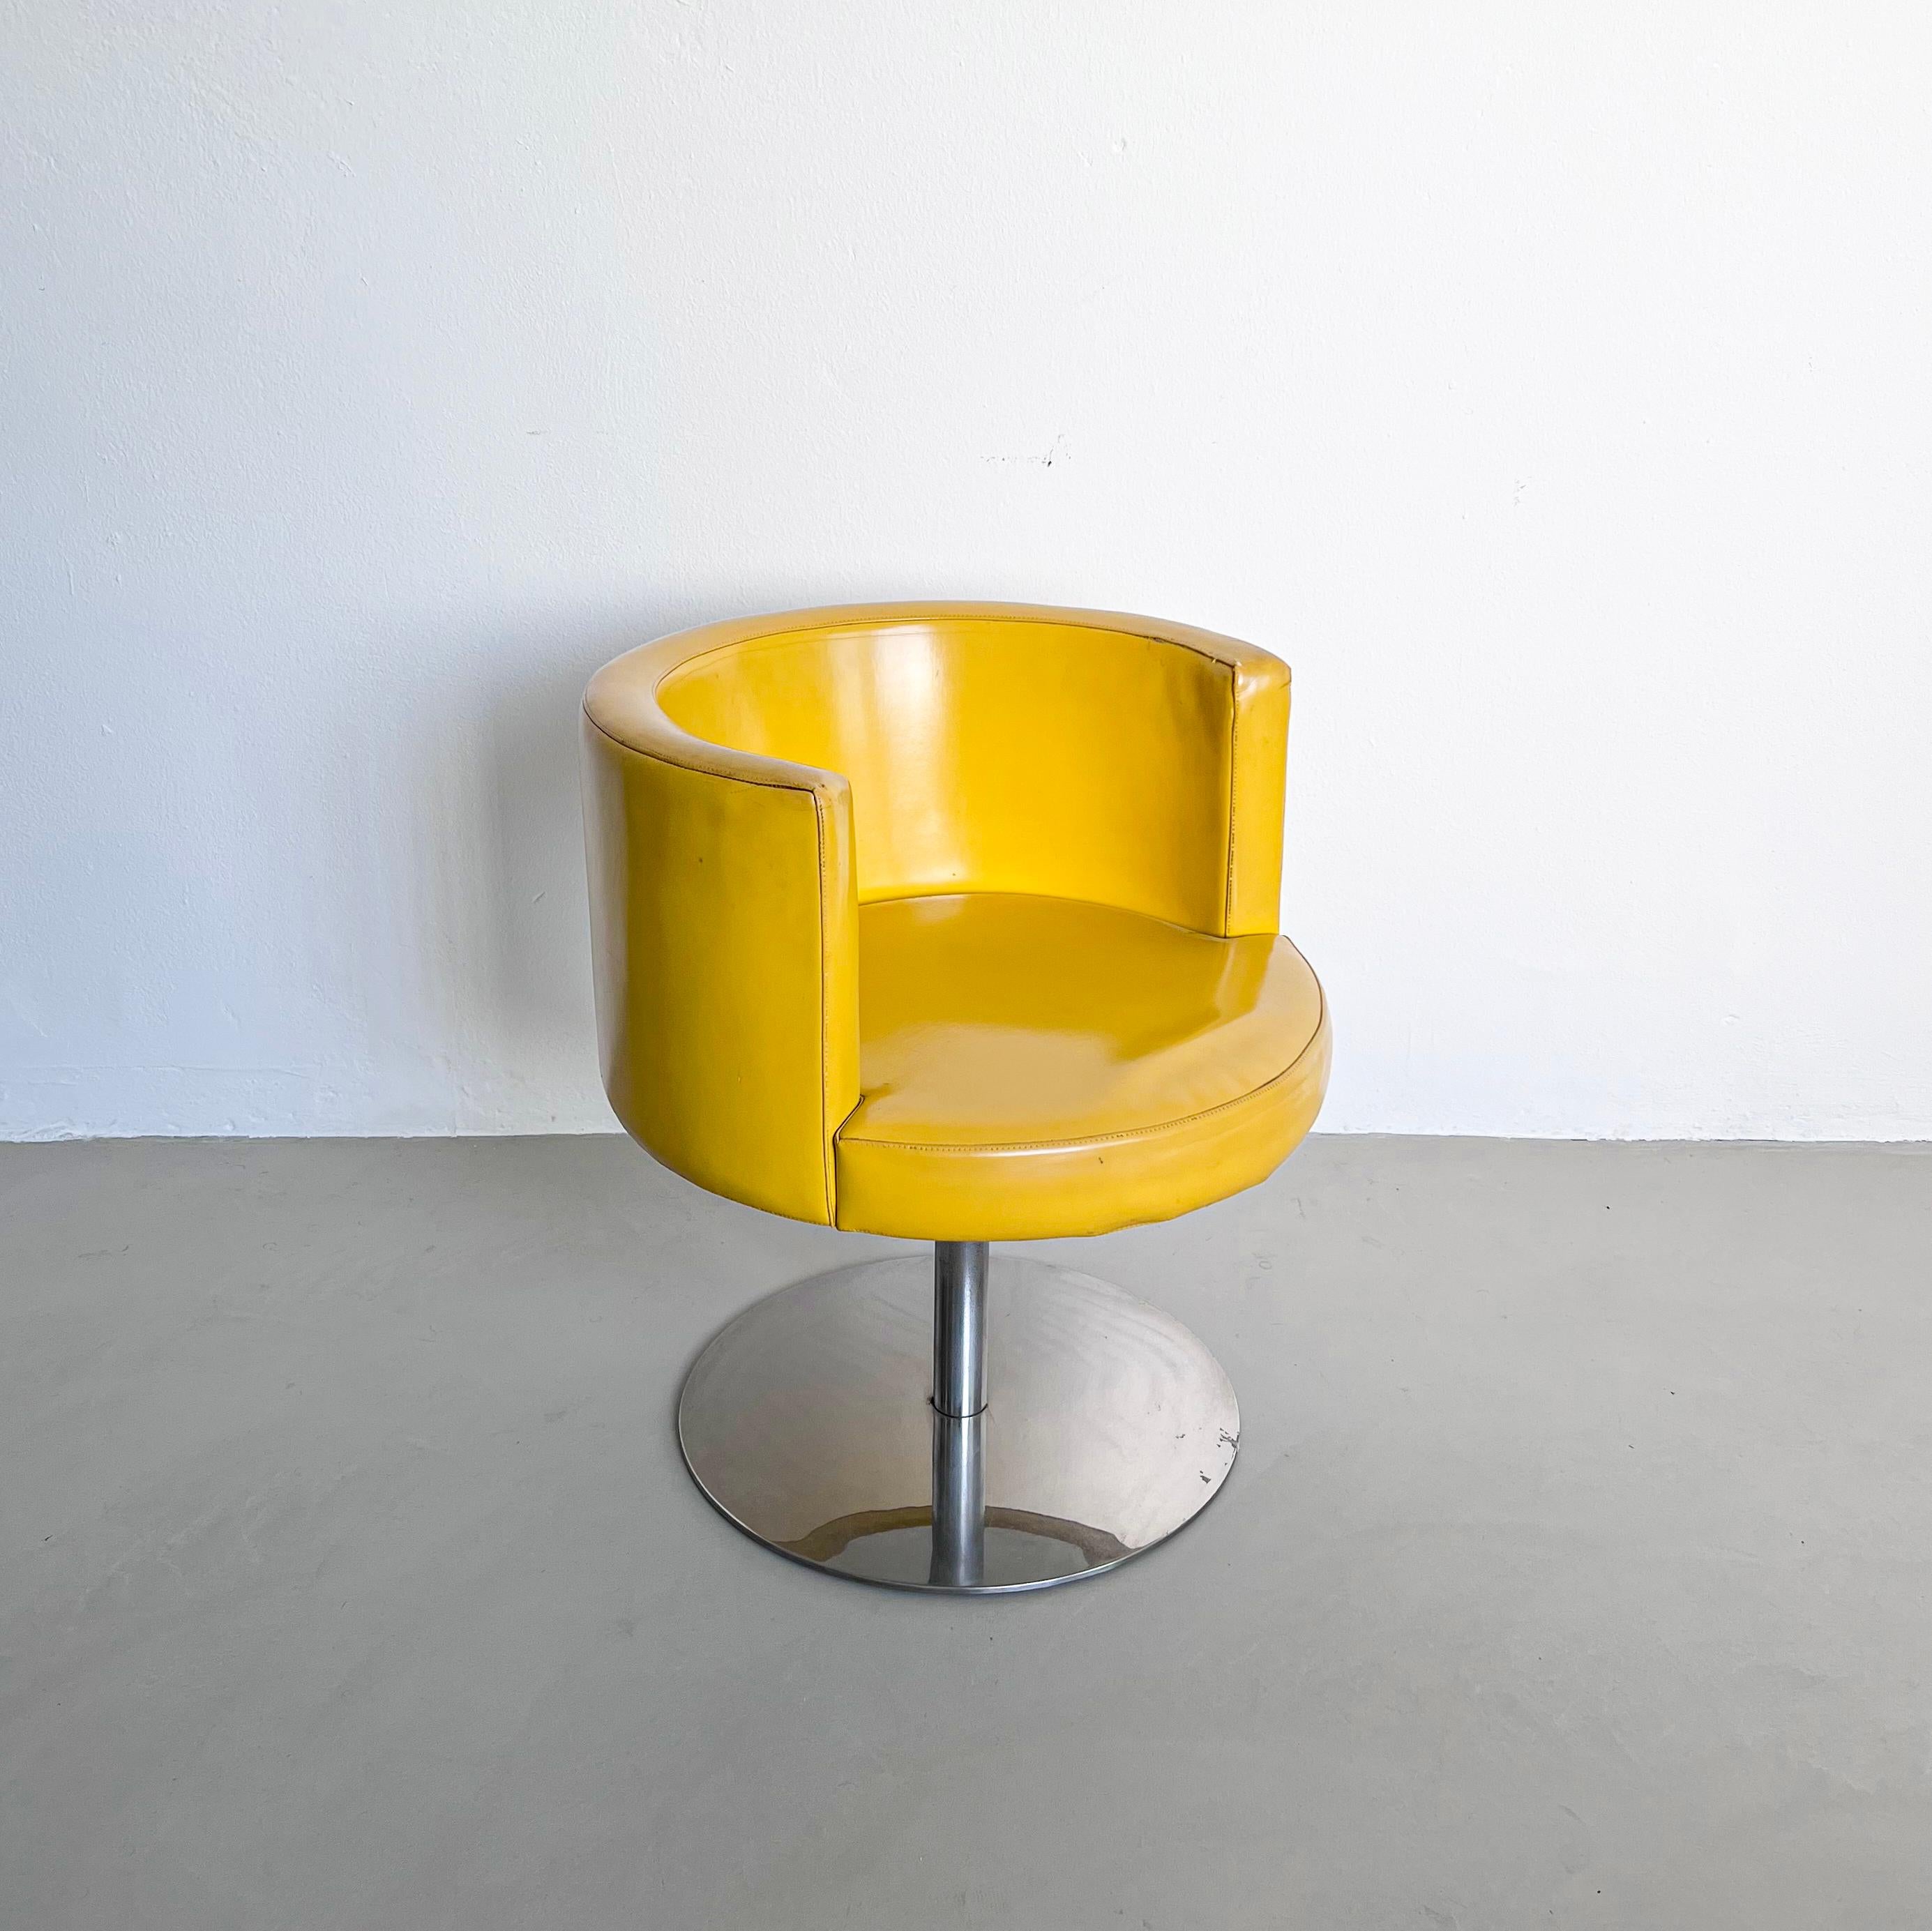 Vintage Italian Space Age Yellow Leather Accent Swivel Chair by Antonia Astori In Good Condition For Sale In Milano, IT